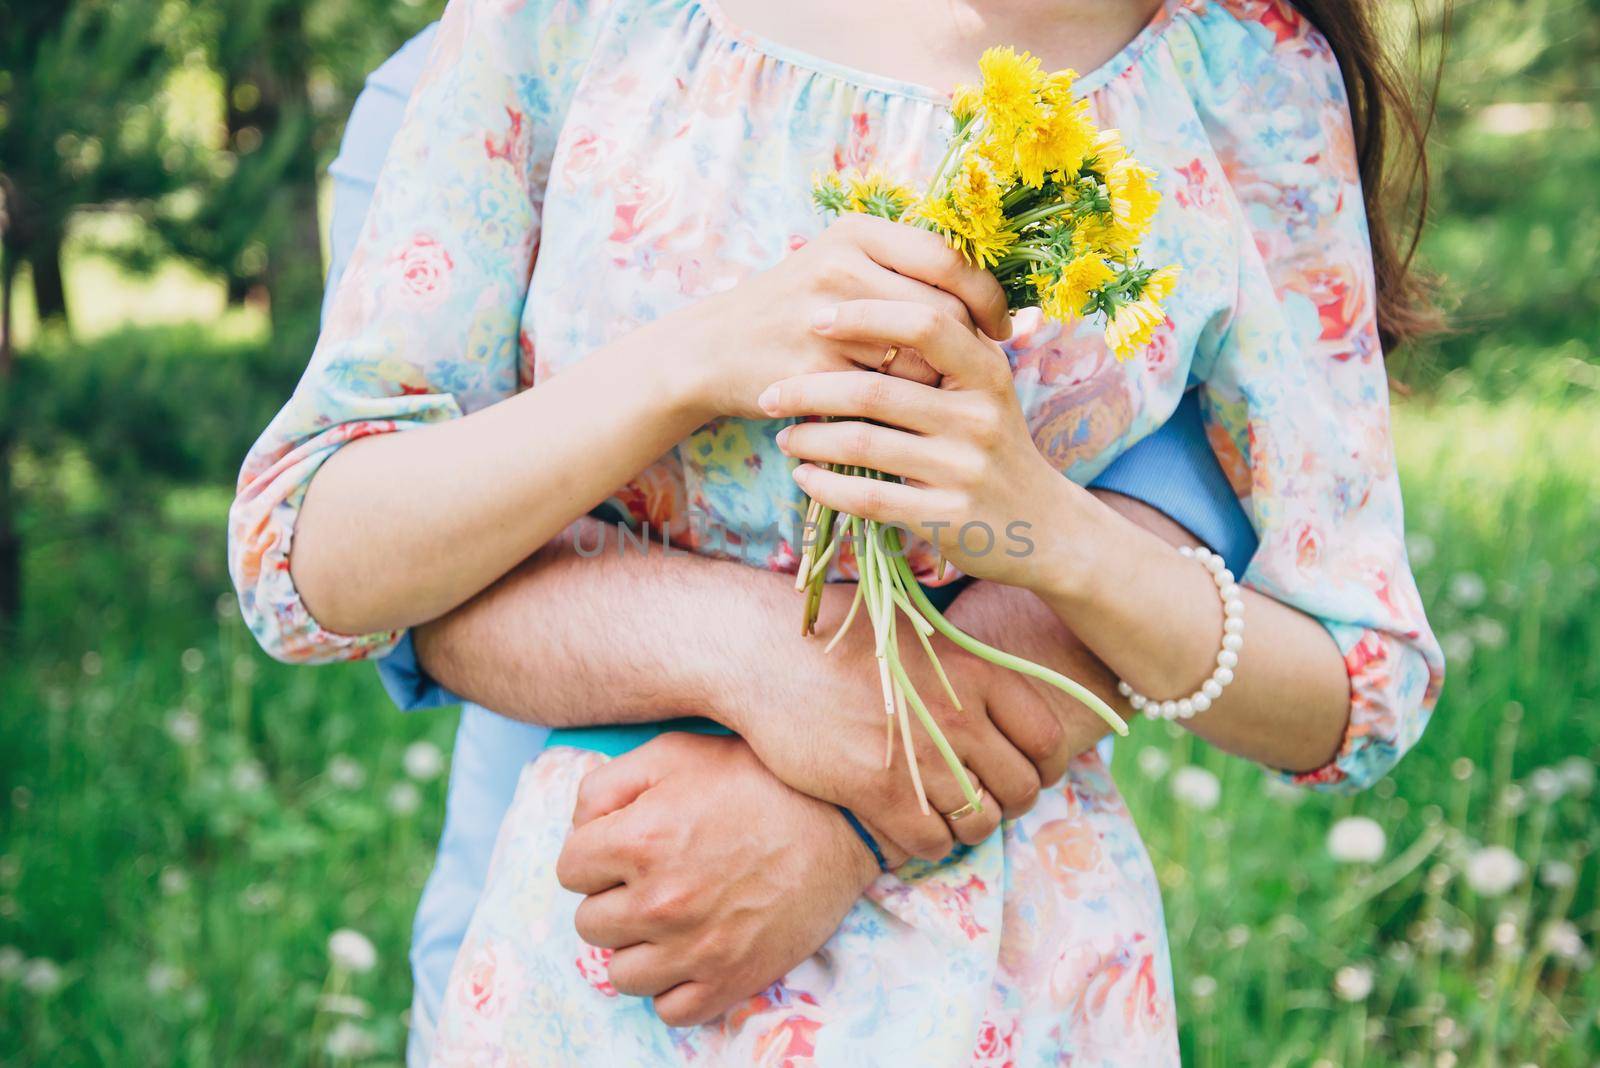 Married loving couple resting in summer, man embraces a woman in summer park. Woman holding bouquet of yellow dandelions